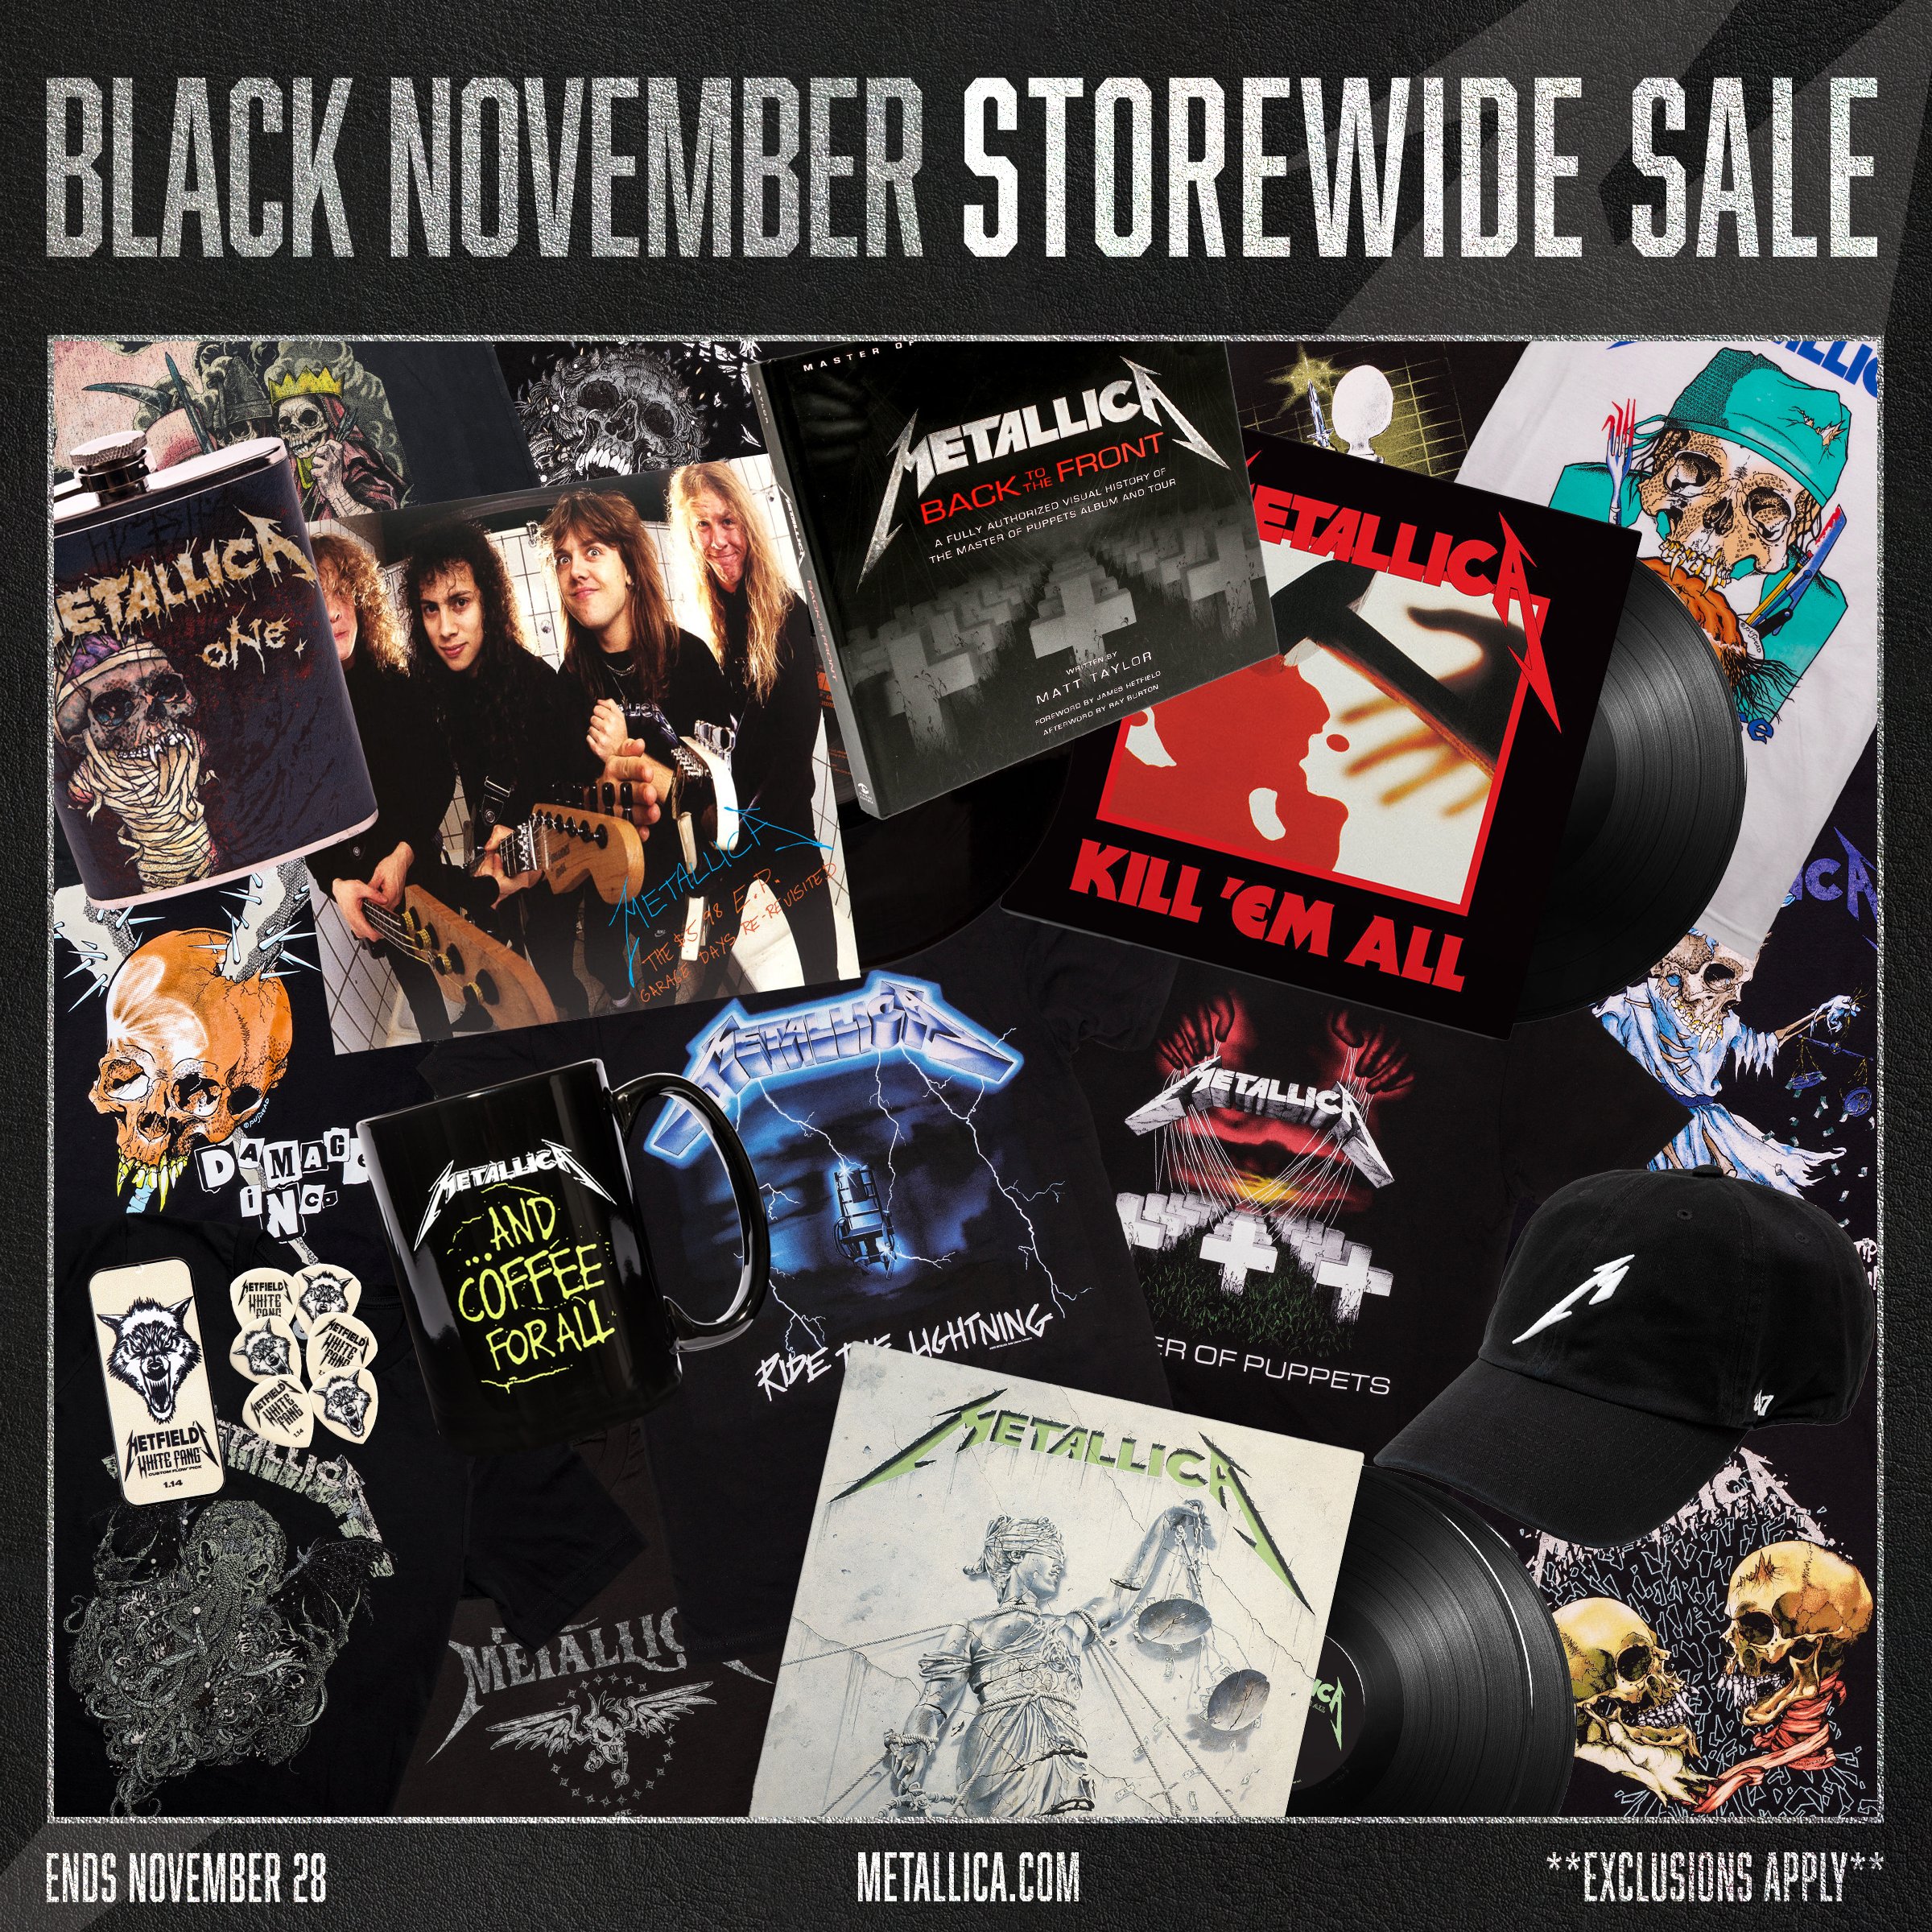 Metallica on "Black November continues with The Metallica Store's biggest sale of the year! The Storewide Sale is on — guests save 20% on nearly 700 items in the store…